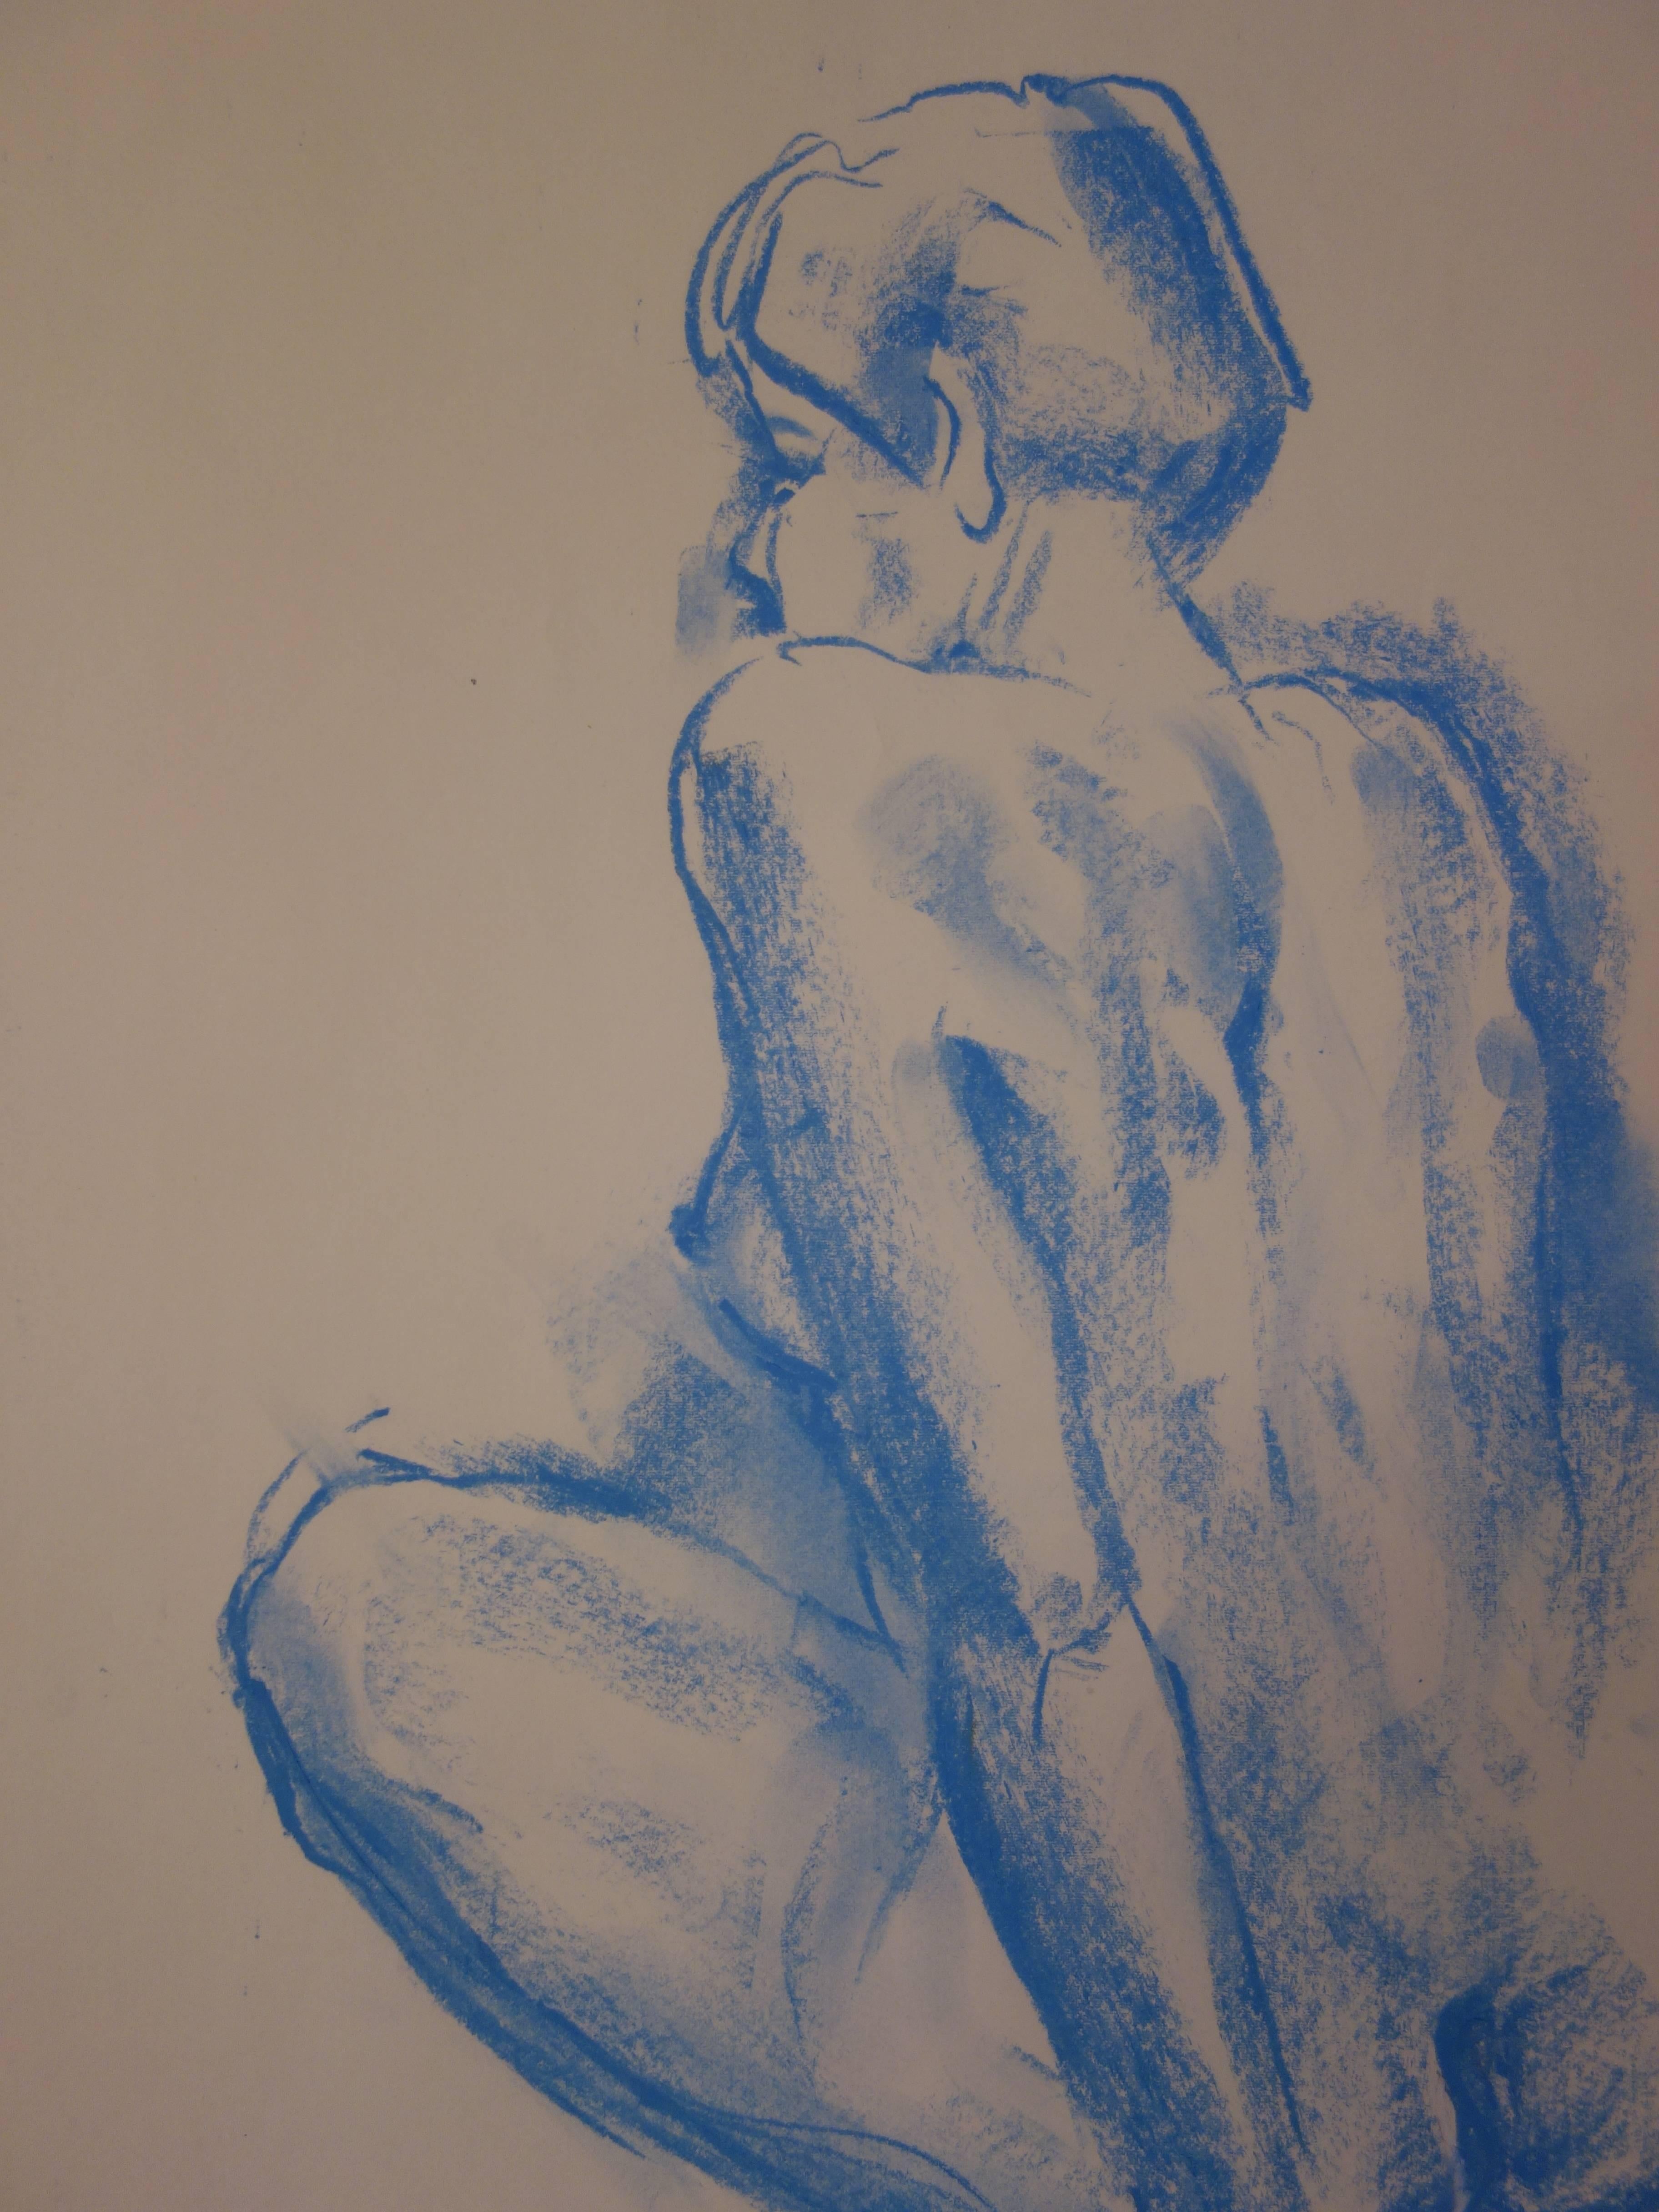 Gaston COPPENS (1909 - 2002)
Model Getting Up

Original charcoal drawing
Signed in the bottom right
On drawing paper 52 x 43 cm (c 21 x 17 inch)

Excellent condition

Gaston Coppens studied sculpture in the prestigious Ecoule Boulle (Paris). Working